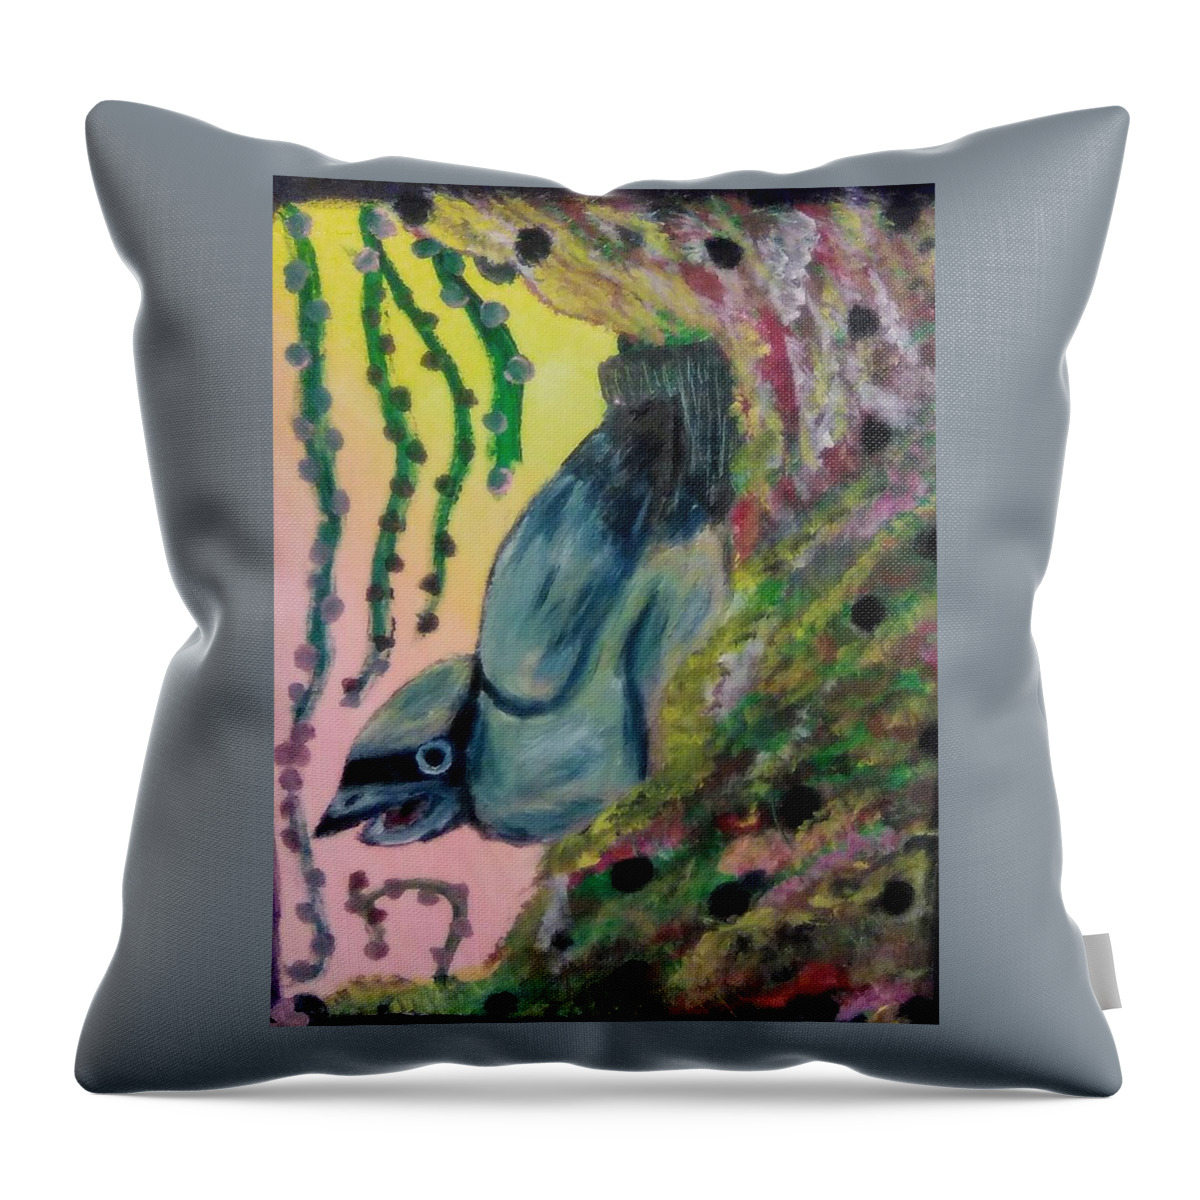 Cedar Waxwing Throw Pillow featuring the painting Cedar Waxwing by Andrew Blitman